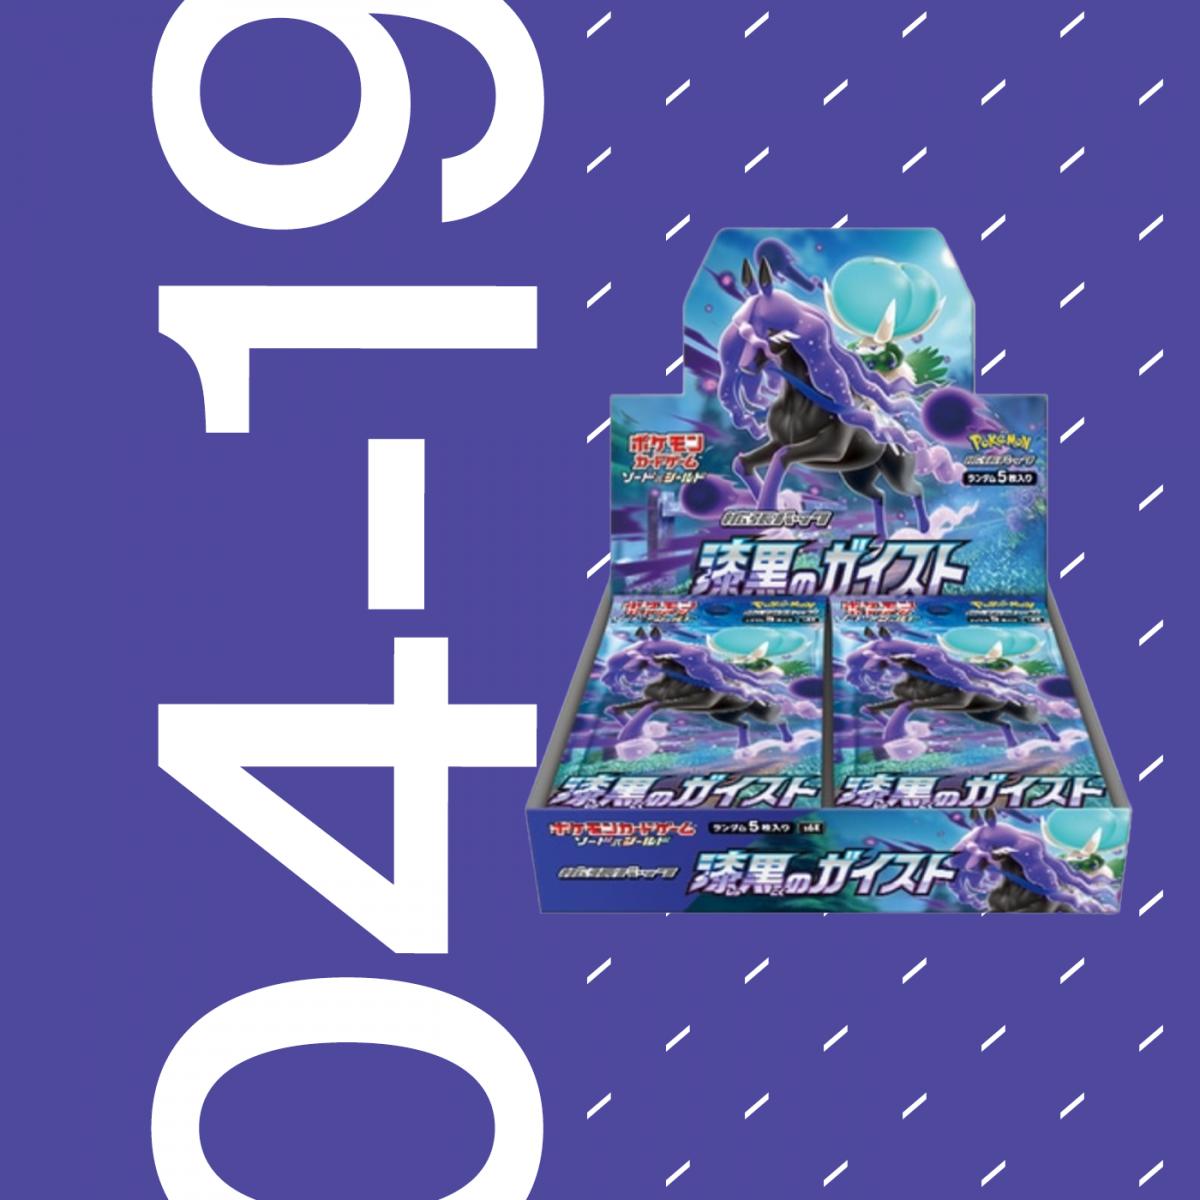 The Rip 04/19 Trading Card Releases